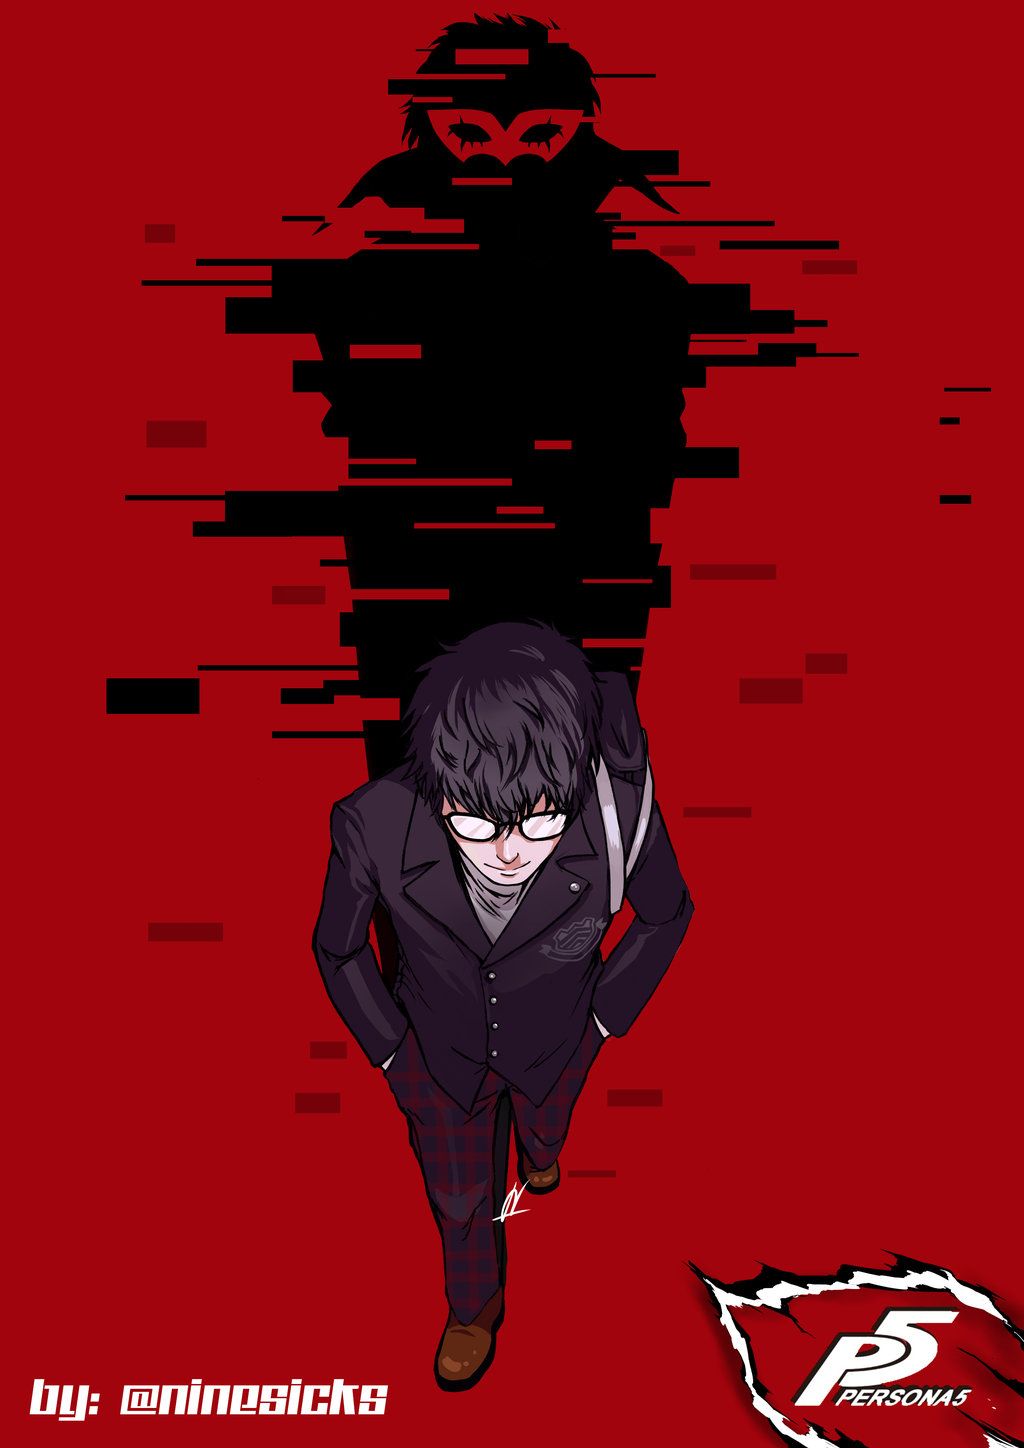 persona 5 iphone wallpaper,red,poster,graphic design,font,illustration